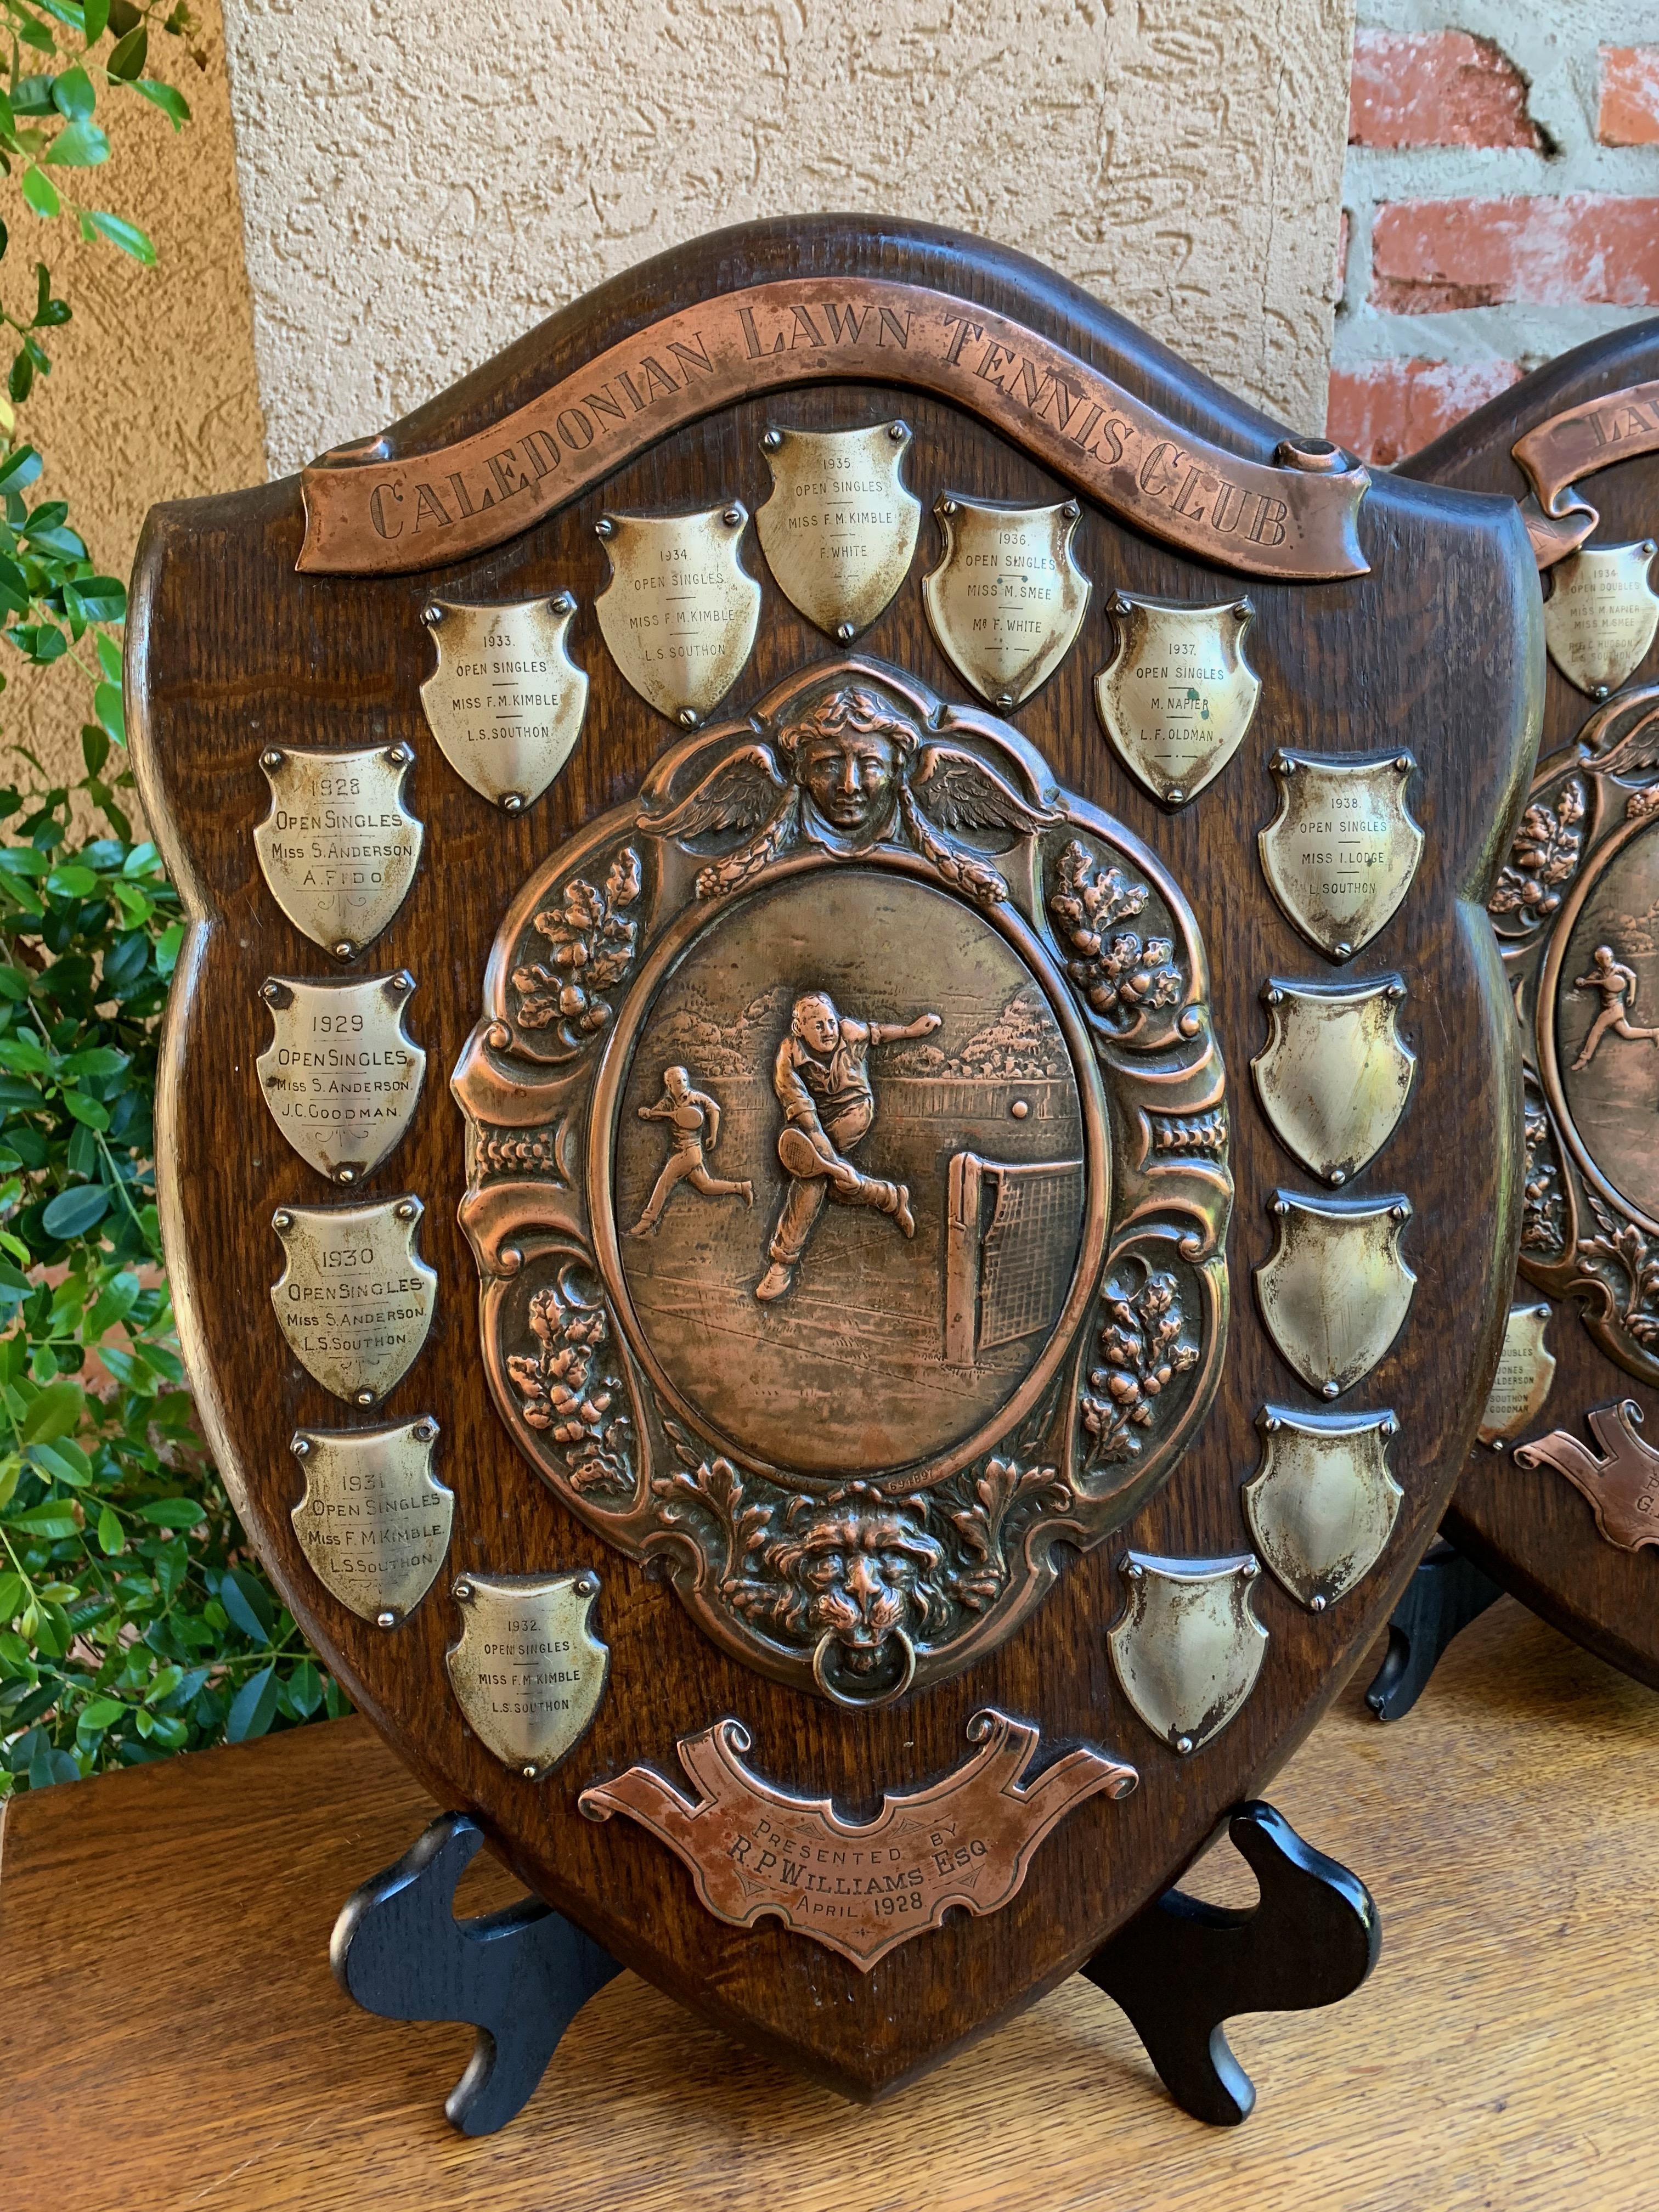 Direct from England, a one-of-a-kind English tennis club wall plaque!
~This big wood shield trophy has copper upper and lower banners that engraved:
Caledonian Lawn Tennis Club
Presented by R. P. Williams, Esq
April, 1928

The Caledonian Lawn